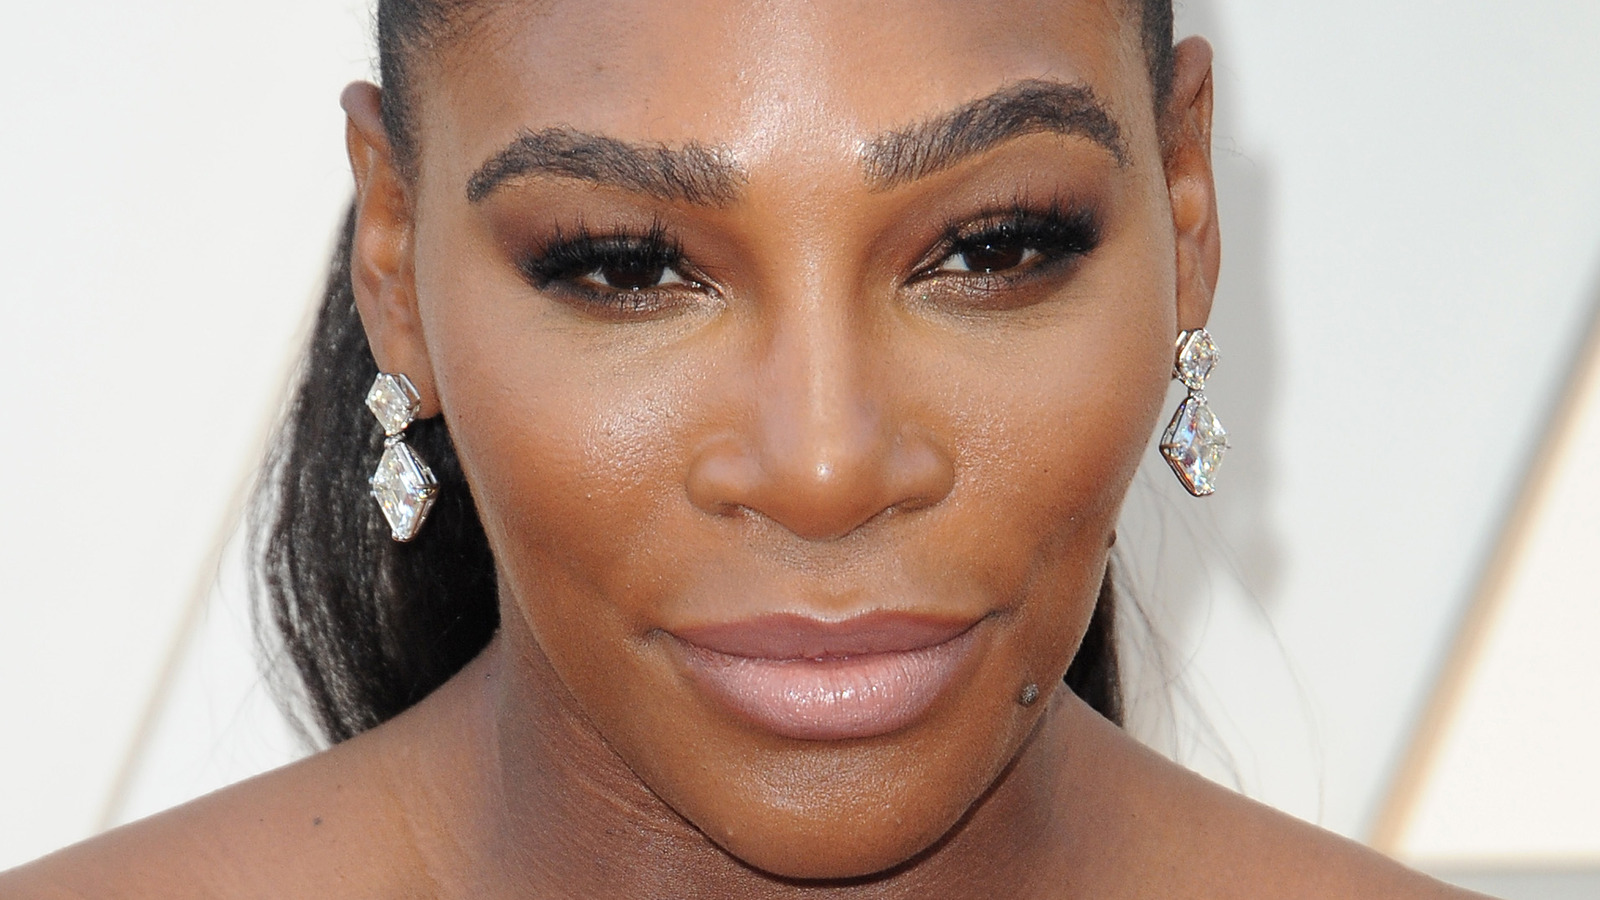 Why Serena Williams' father didn't walk her down the aisle